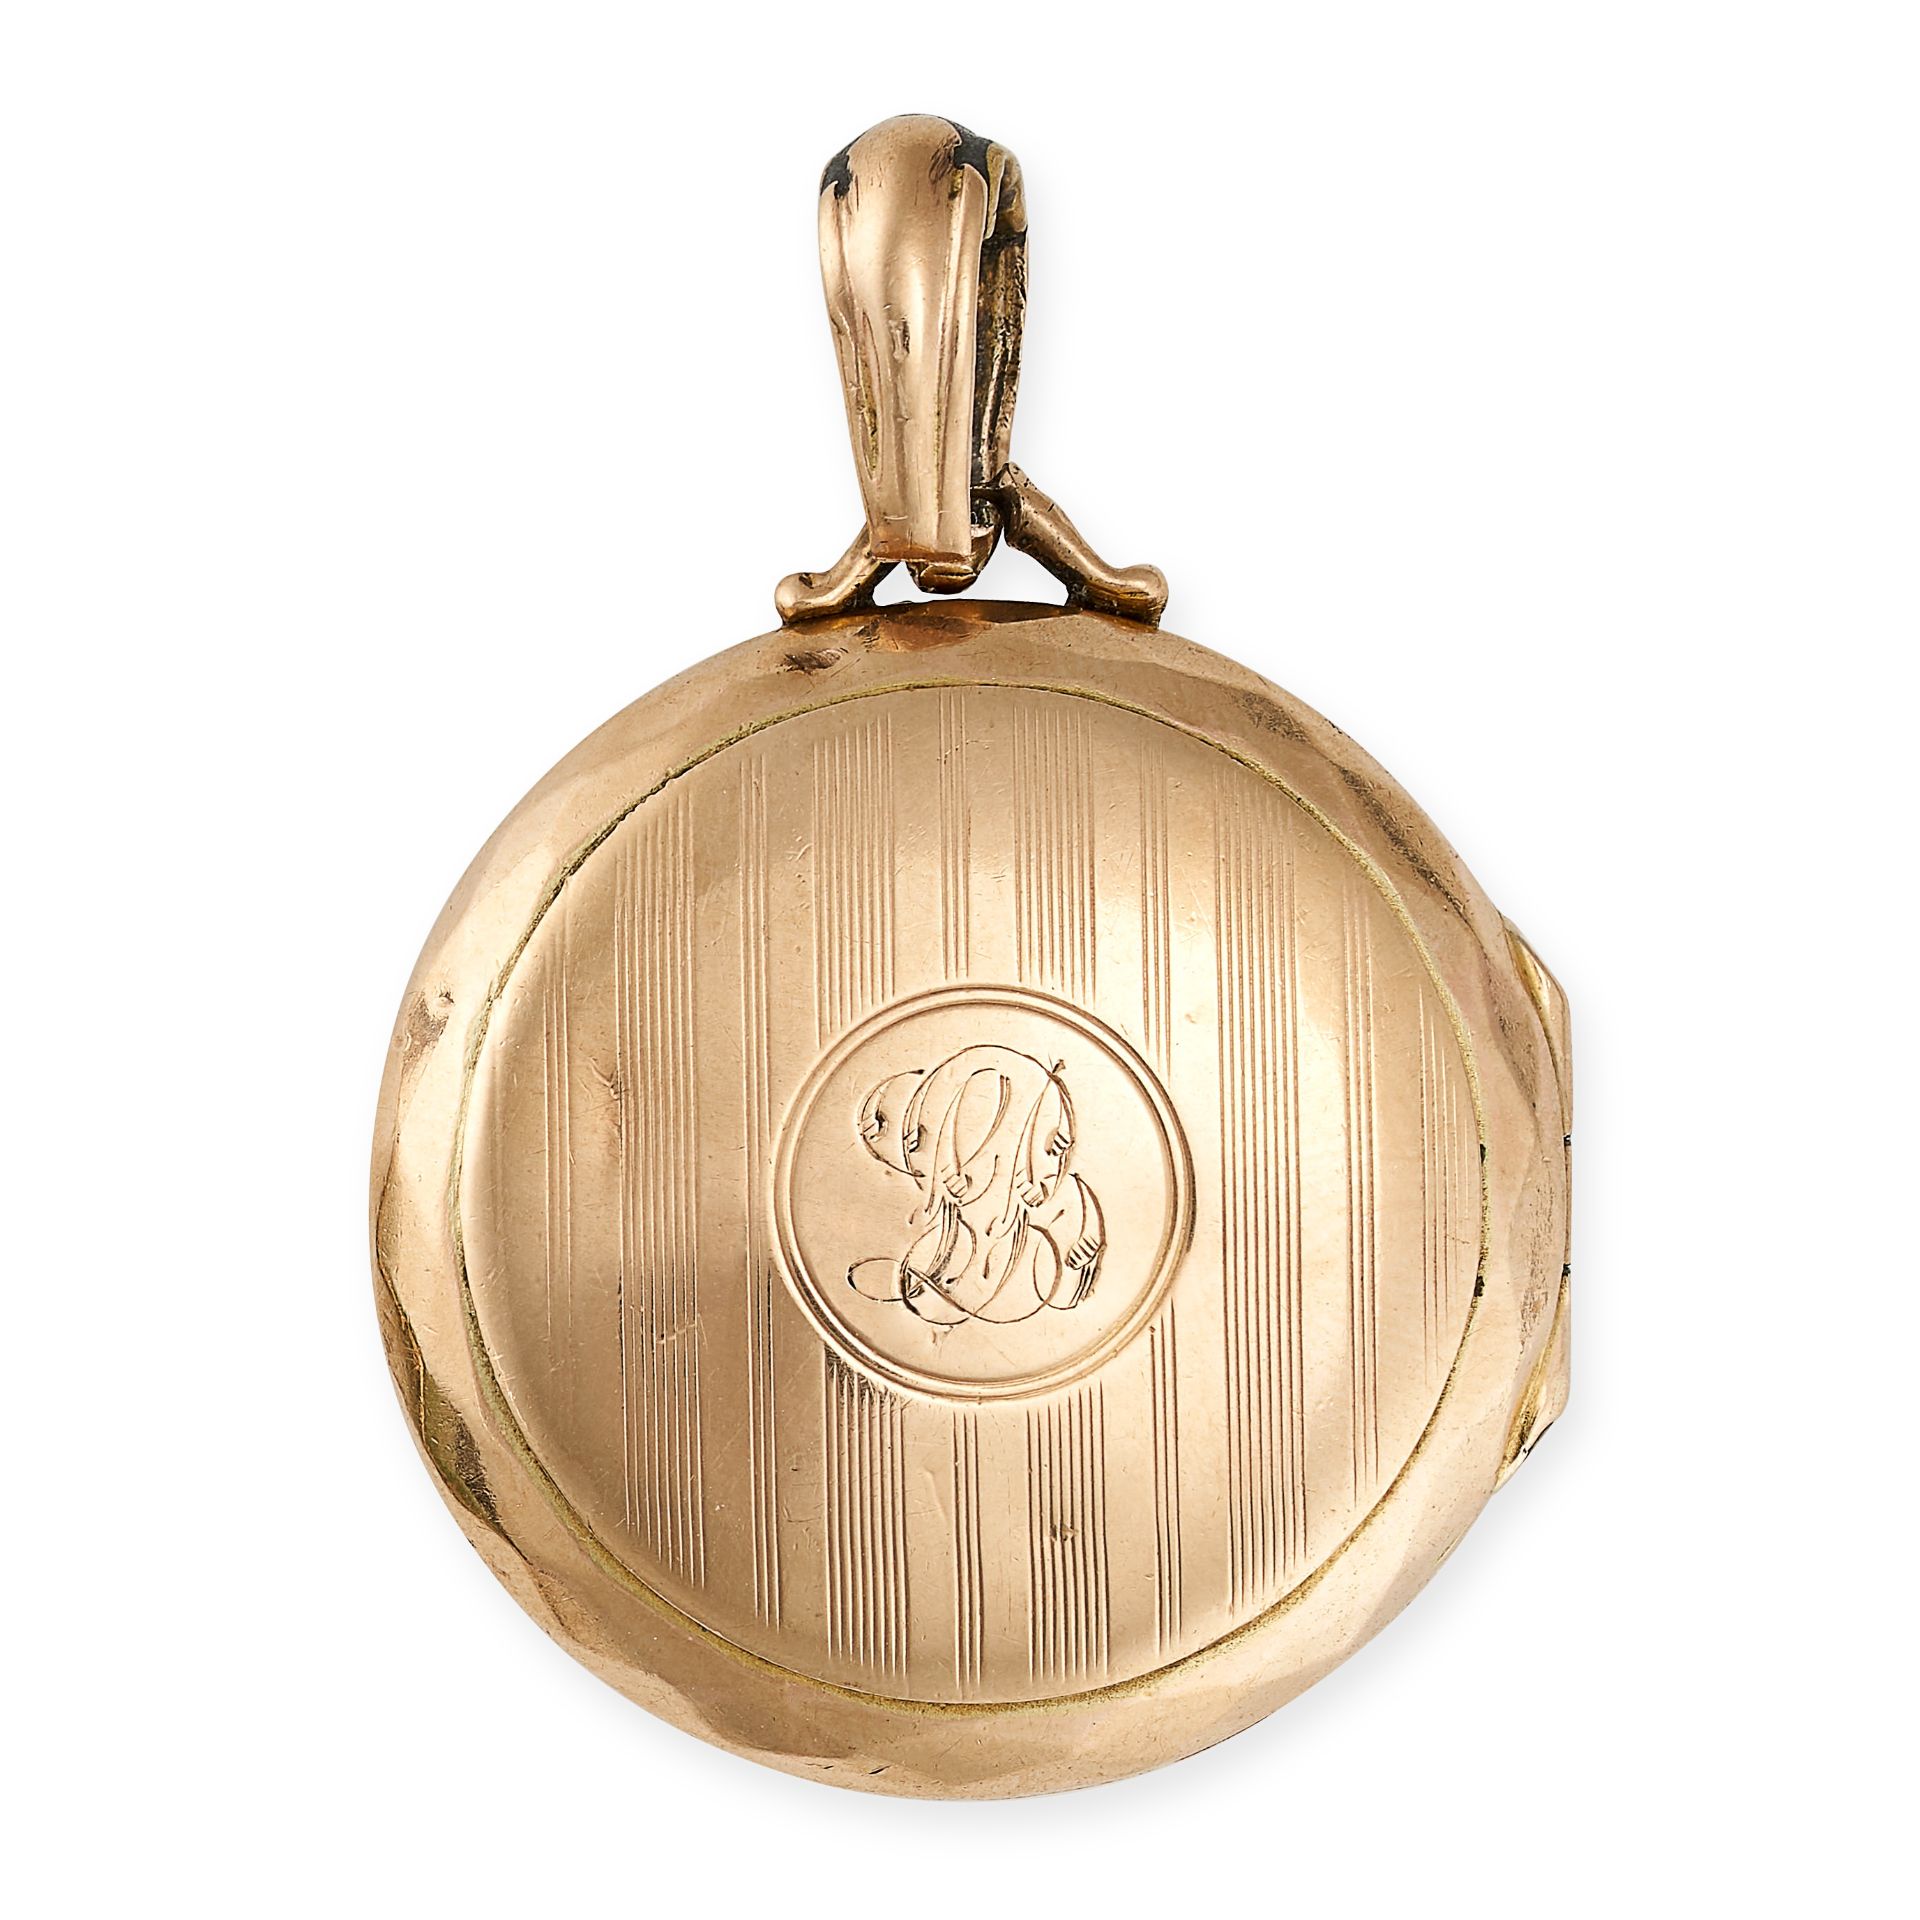 AN ANTIQUE EDWARDIAN LOCKET PENDANT in 9ct yellow gold, designed as a circular locket with an eng...